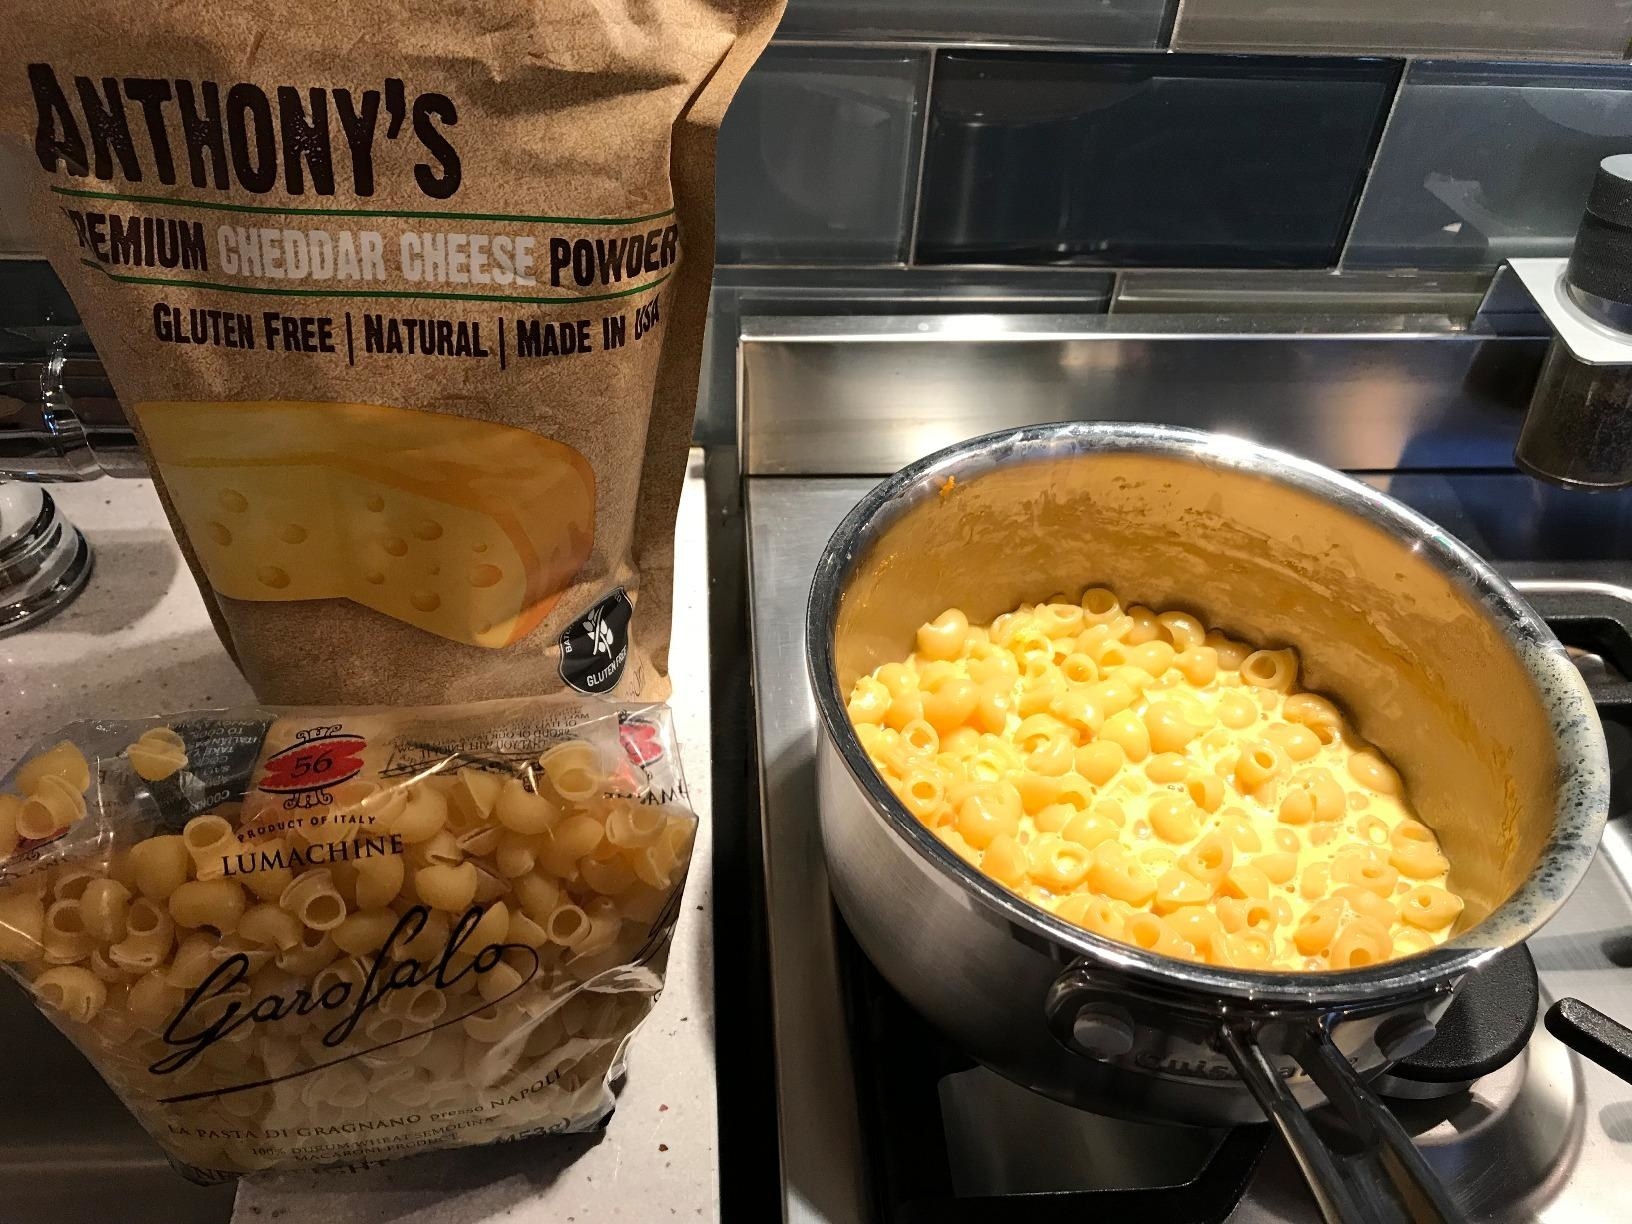 bowl of really cheesy looking mac and cheese next to the bag of powdered cheese 